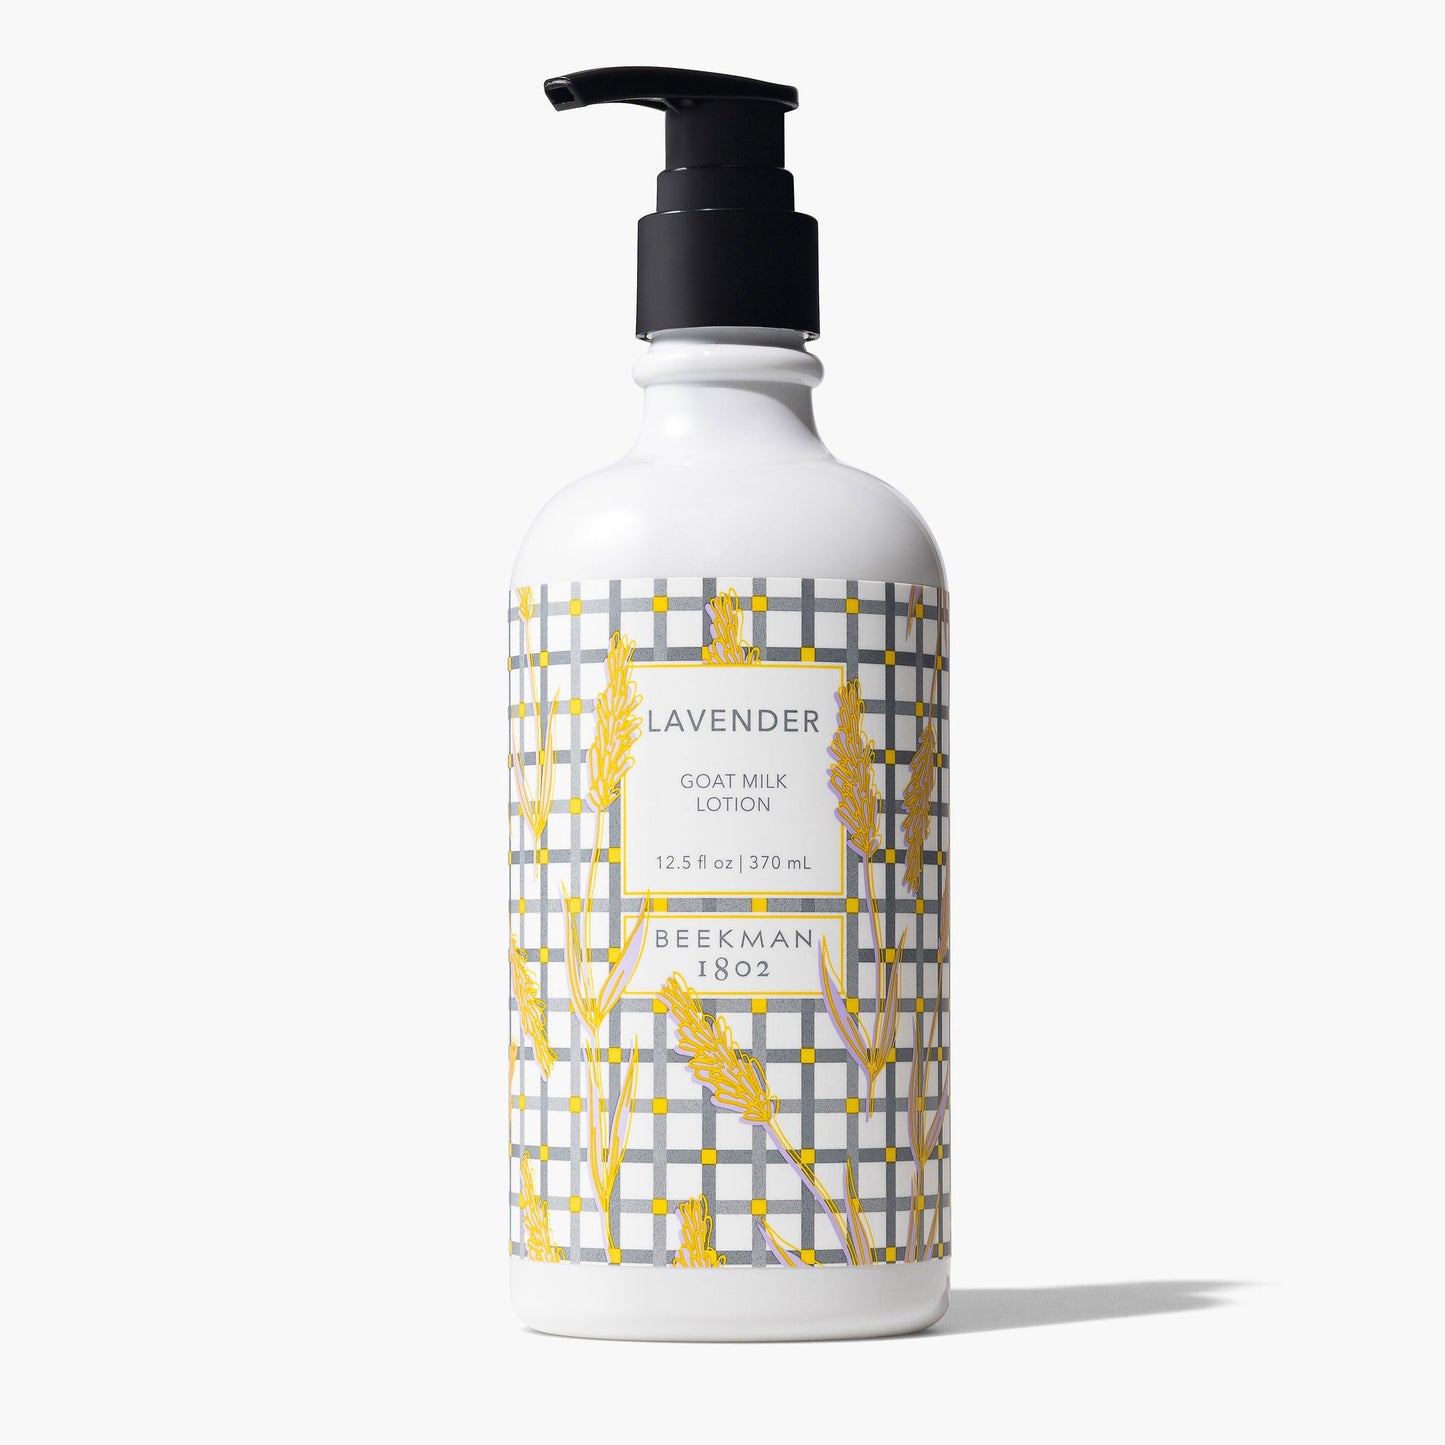 pump bottle of Lavender Goat Milk lotion with a grey plaid and wheat stalk design printed label.